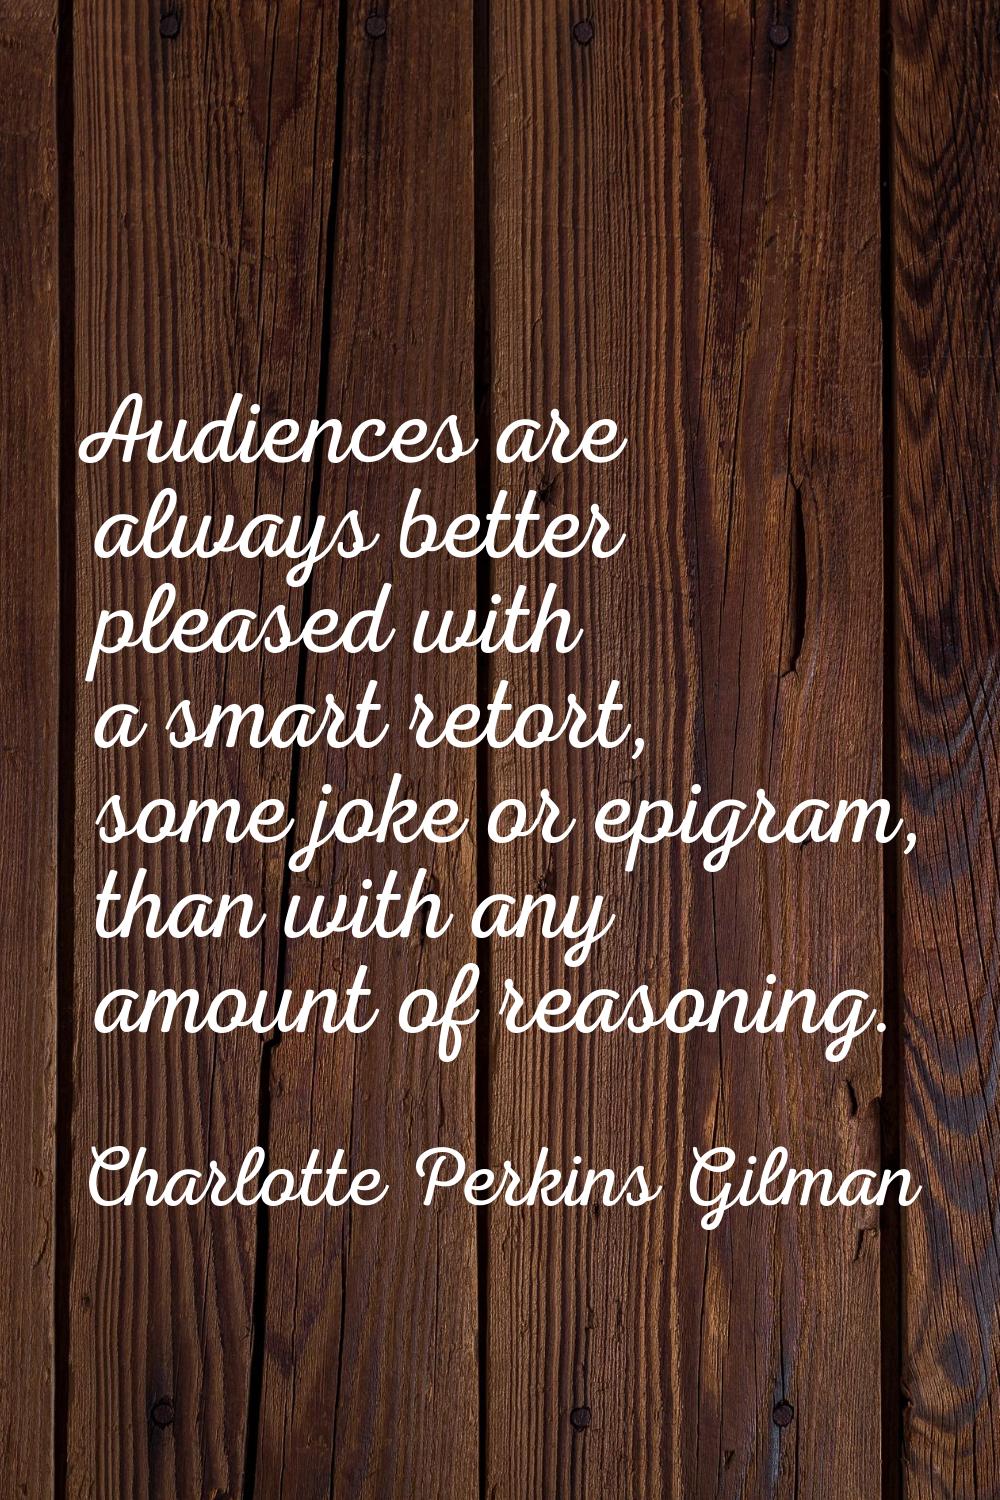 Audiences are always better pleased with a smart retort, some joke or epigram, than with any amount